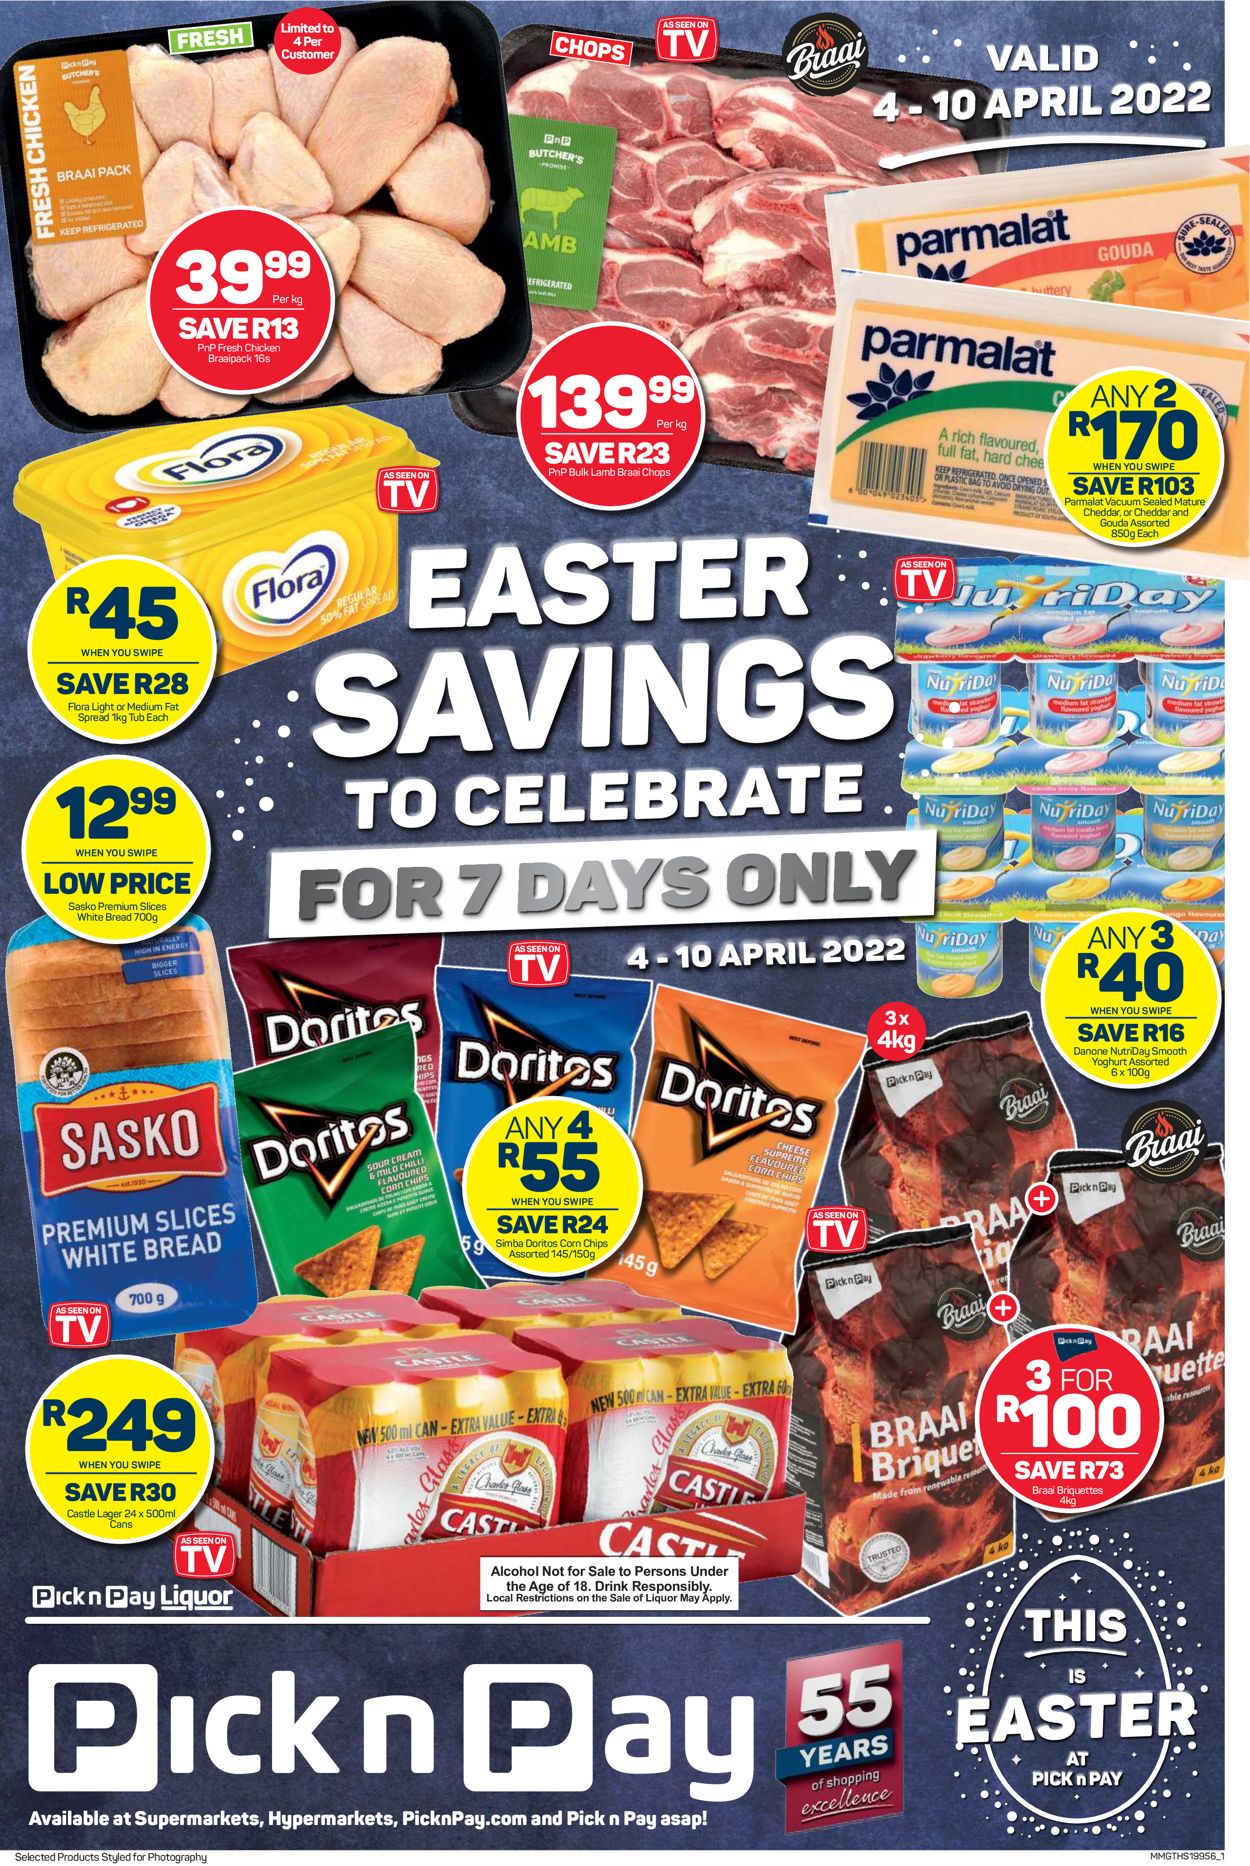 Pick n Pay EASTER 2022 Catalogue - 2022/04/04-2022/04/10